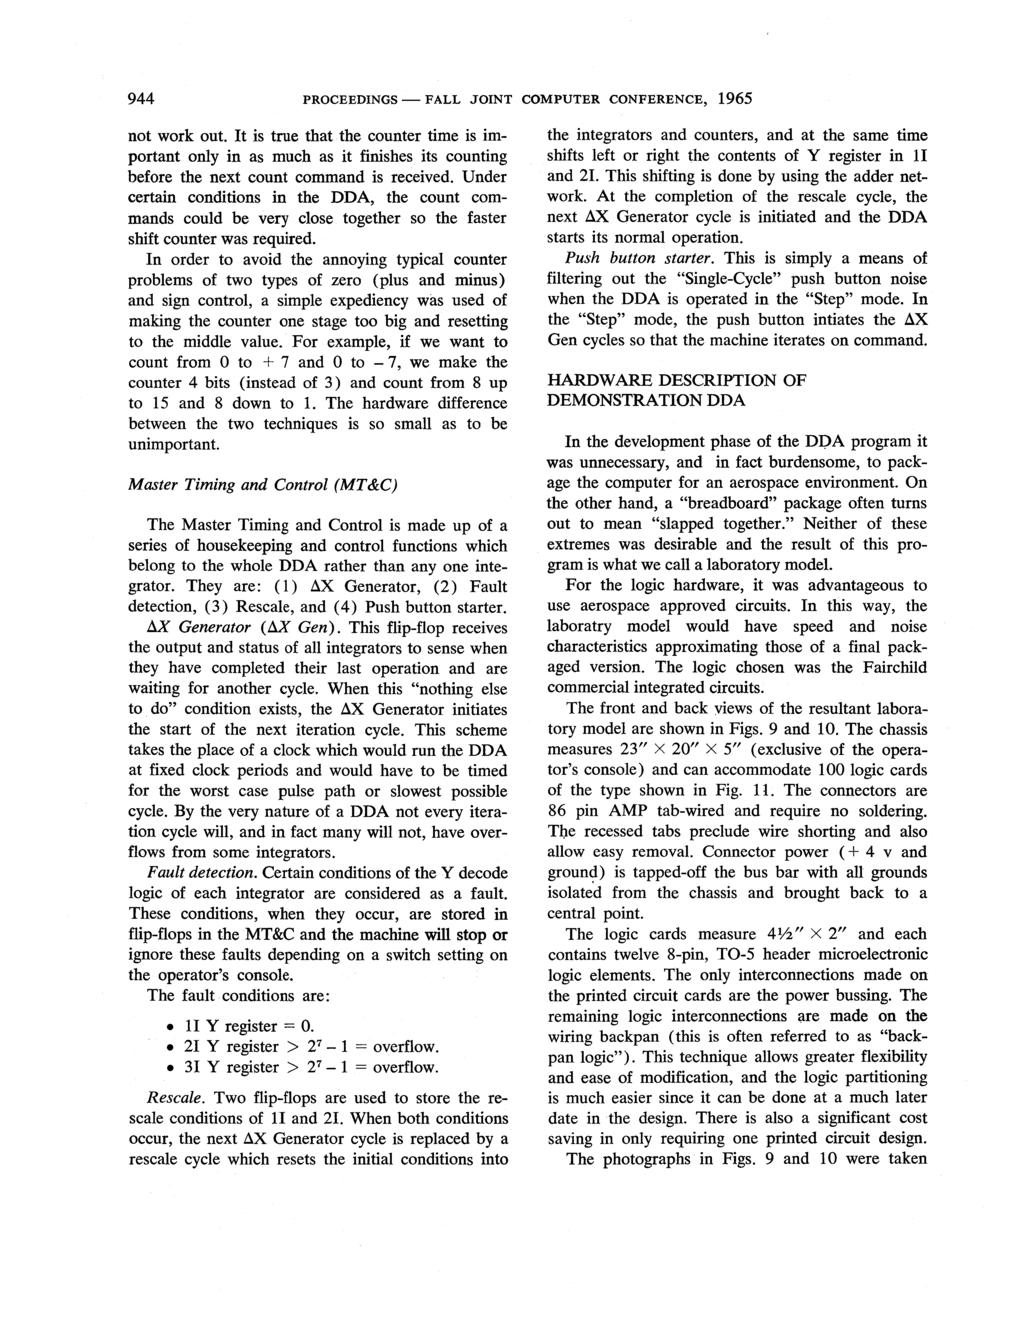 944 PROCEEDINGS - FALL JOINT COMPUTER CONFERENCE, 1965 not work ot. It is tre that. the conter time is important only in as mch as it finishes its conting before the next cont command is received.